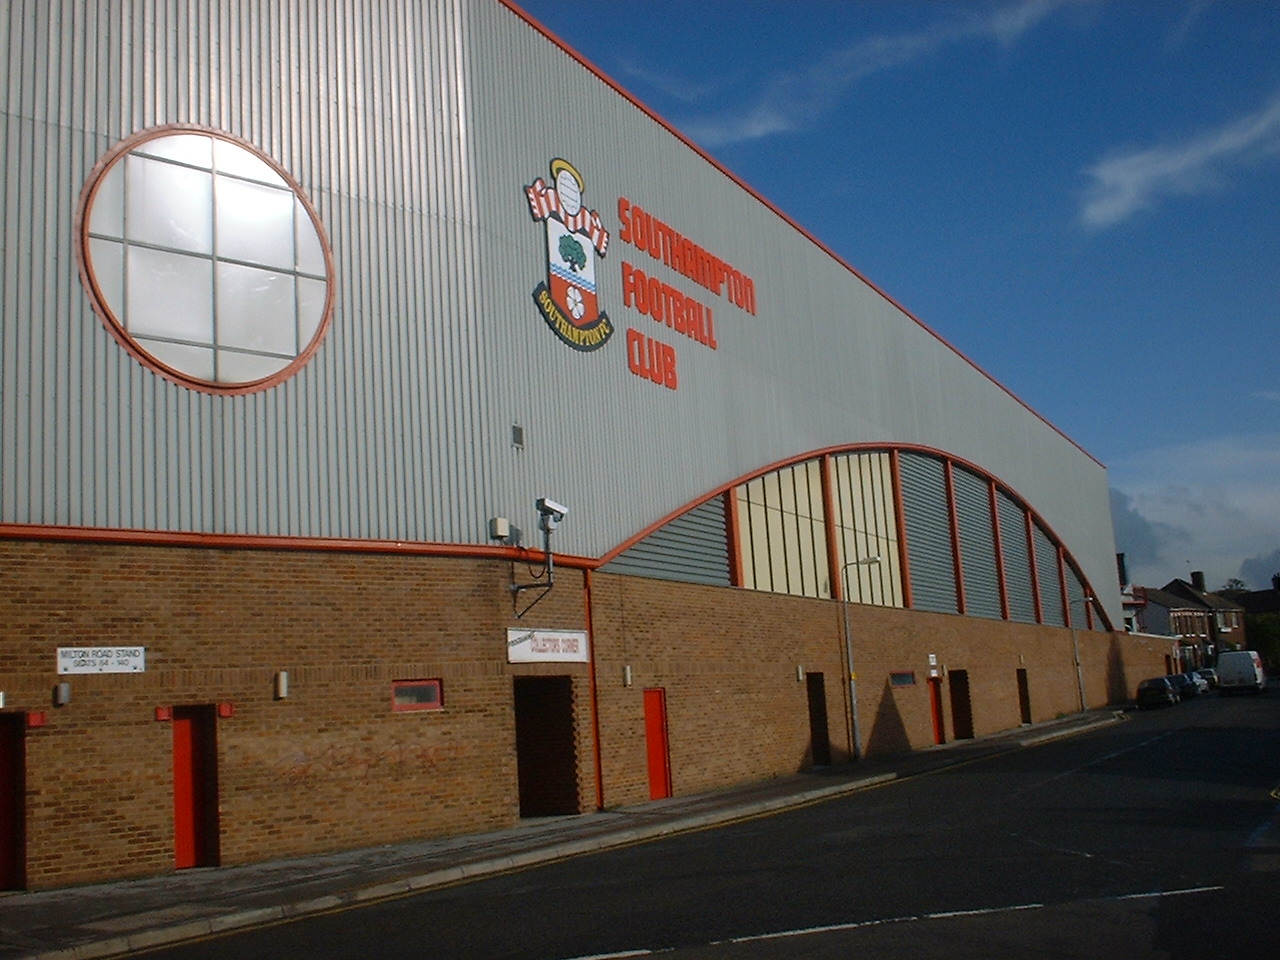 How Southampton FC's former stadium The Dell got its name